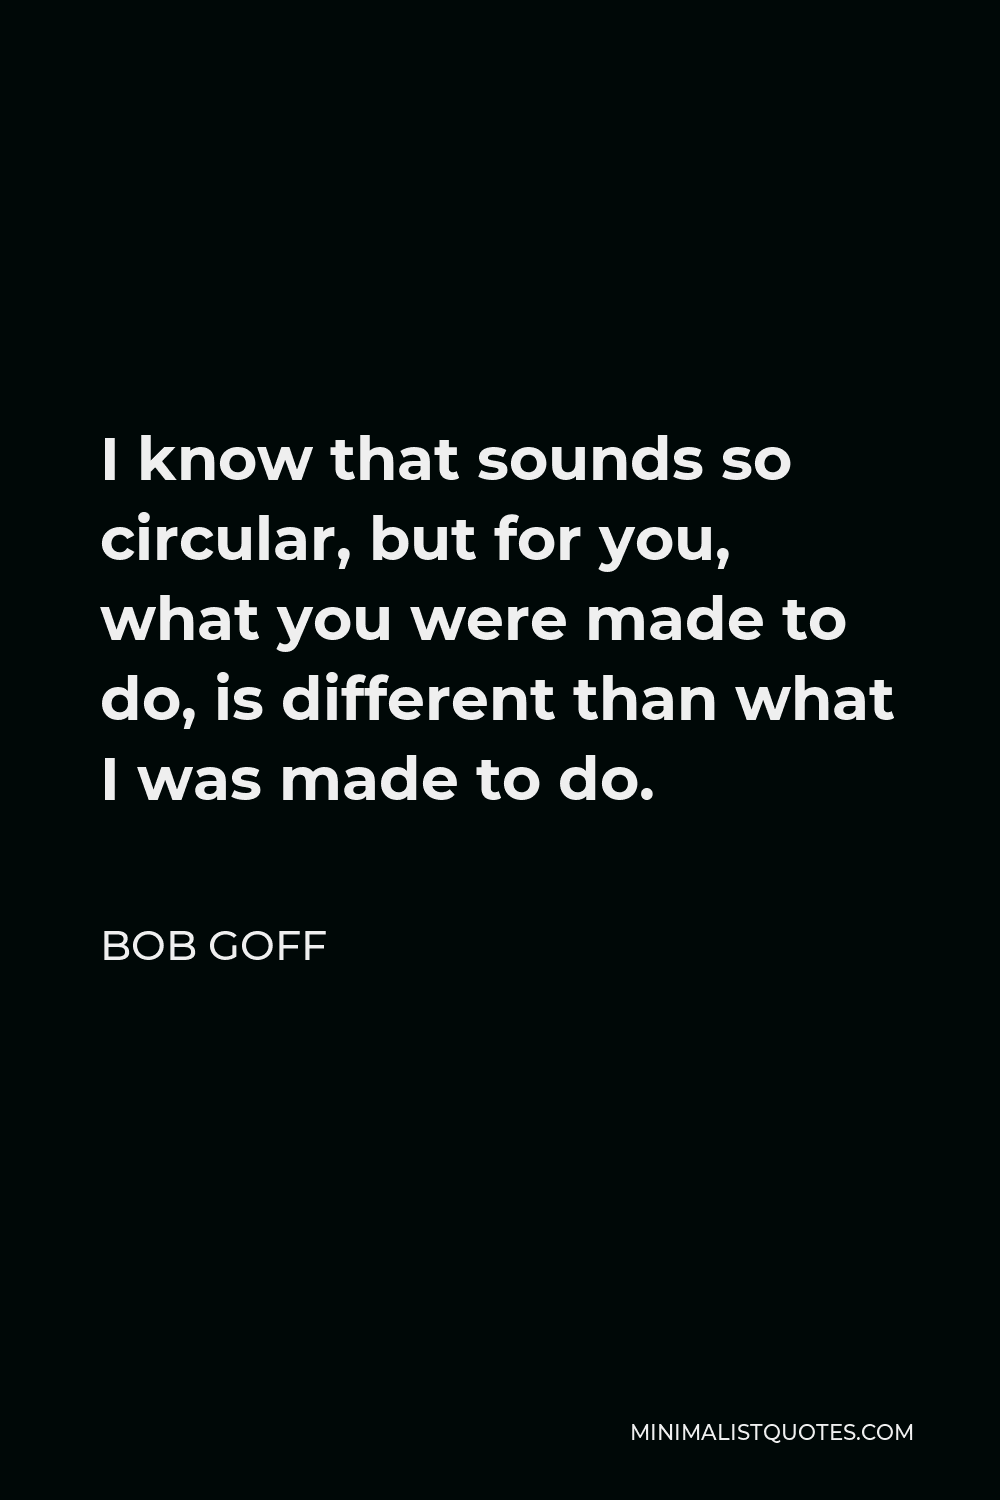 Bob Goff Quote - I know that sounds so circular, but for you, what you were made to do, is different than what I was made to do.